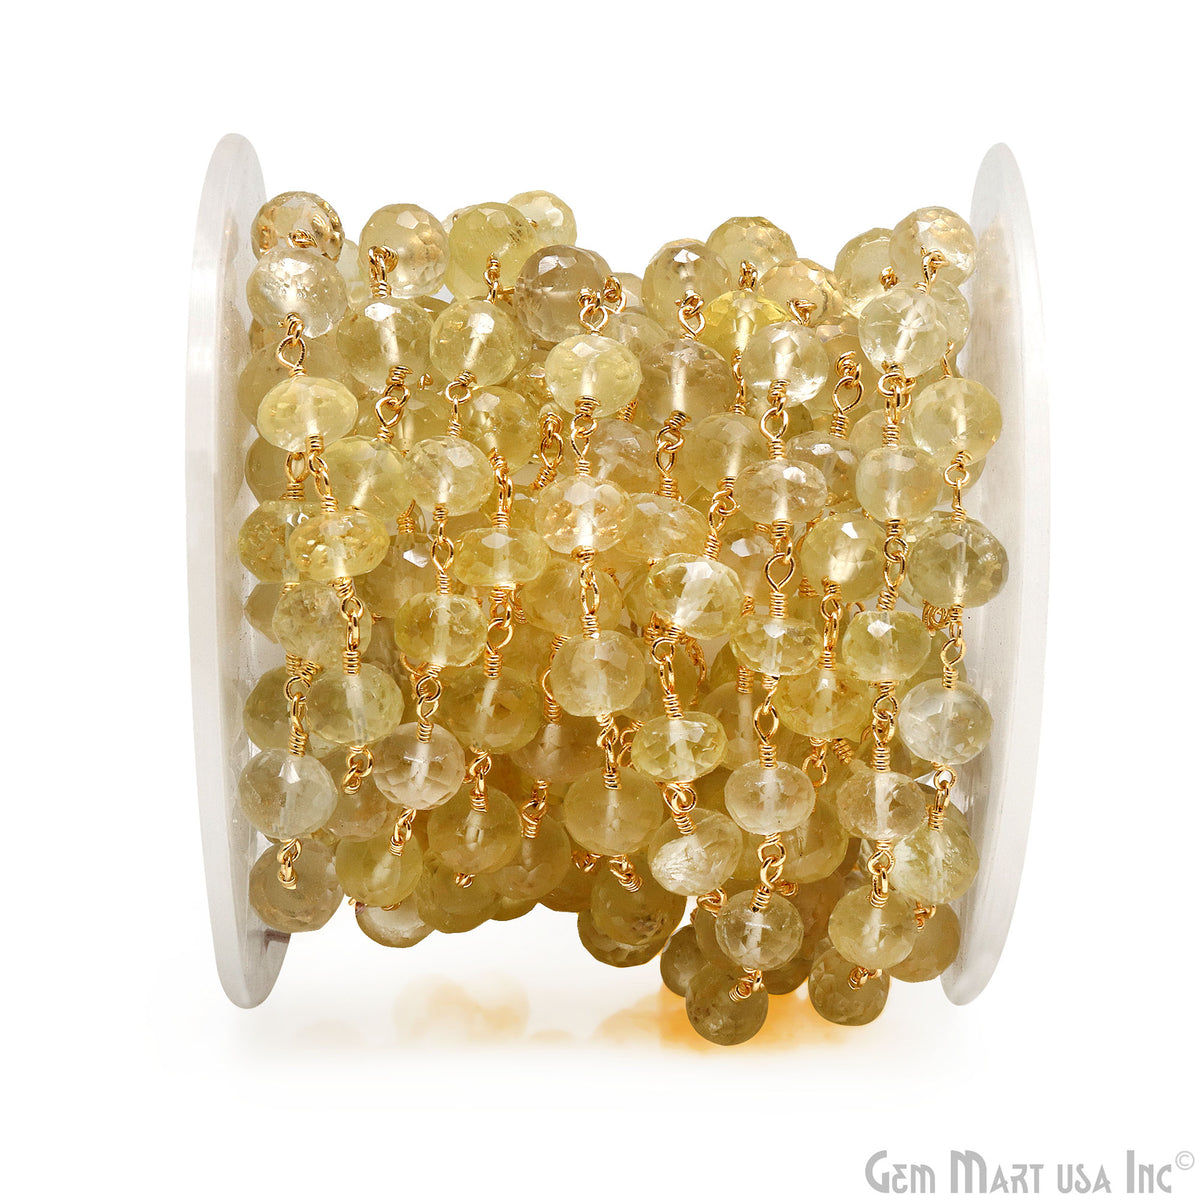 Lemon Topaz Faceted 6-7mm Gold Wire Wrapped Rondelle Beads Rosary Chain